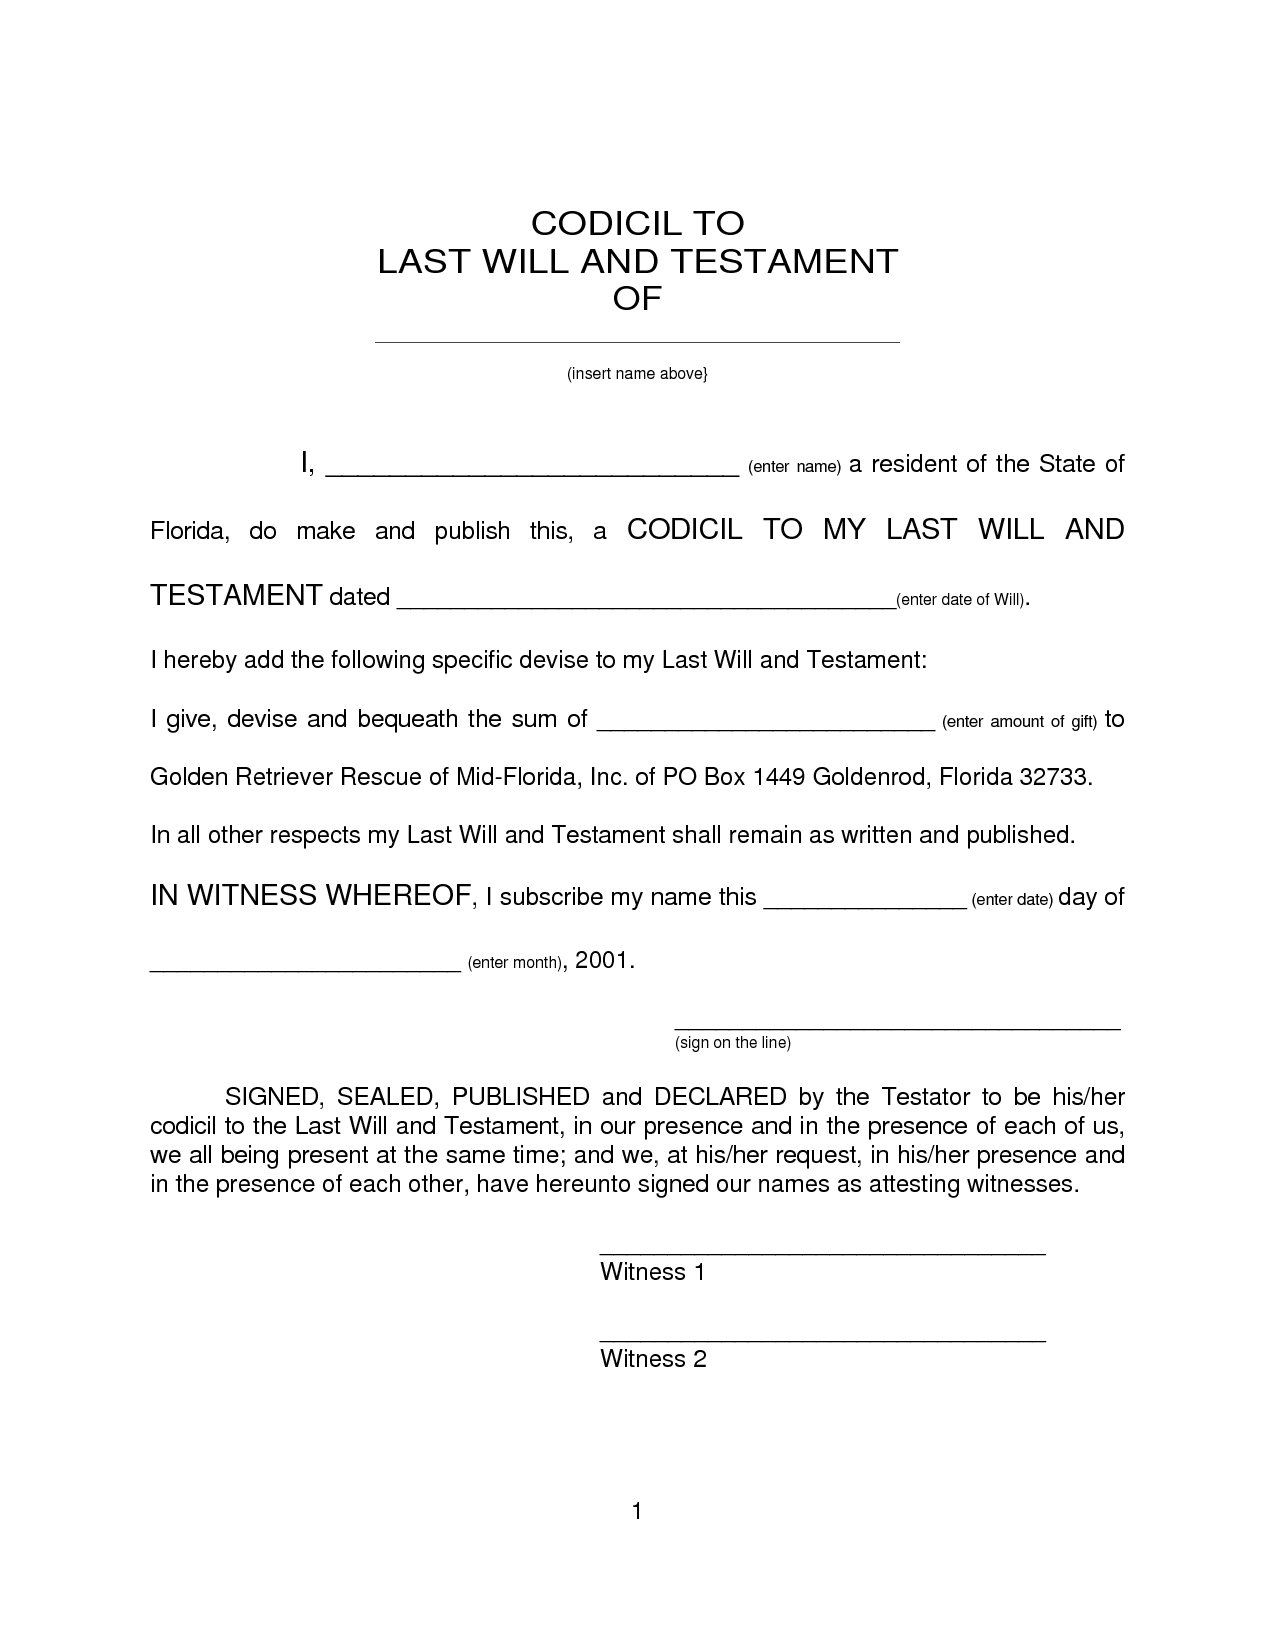 last-will-and-testament-sample-form-free-printable-documents